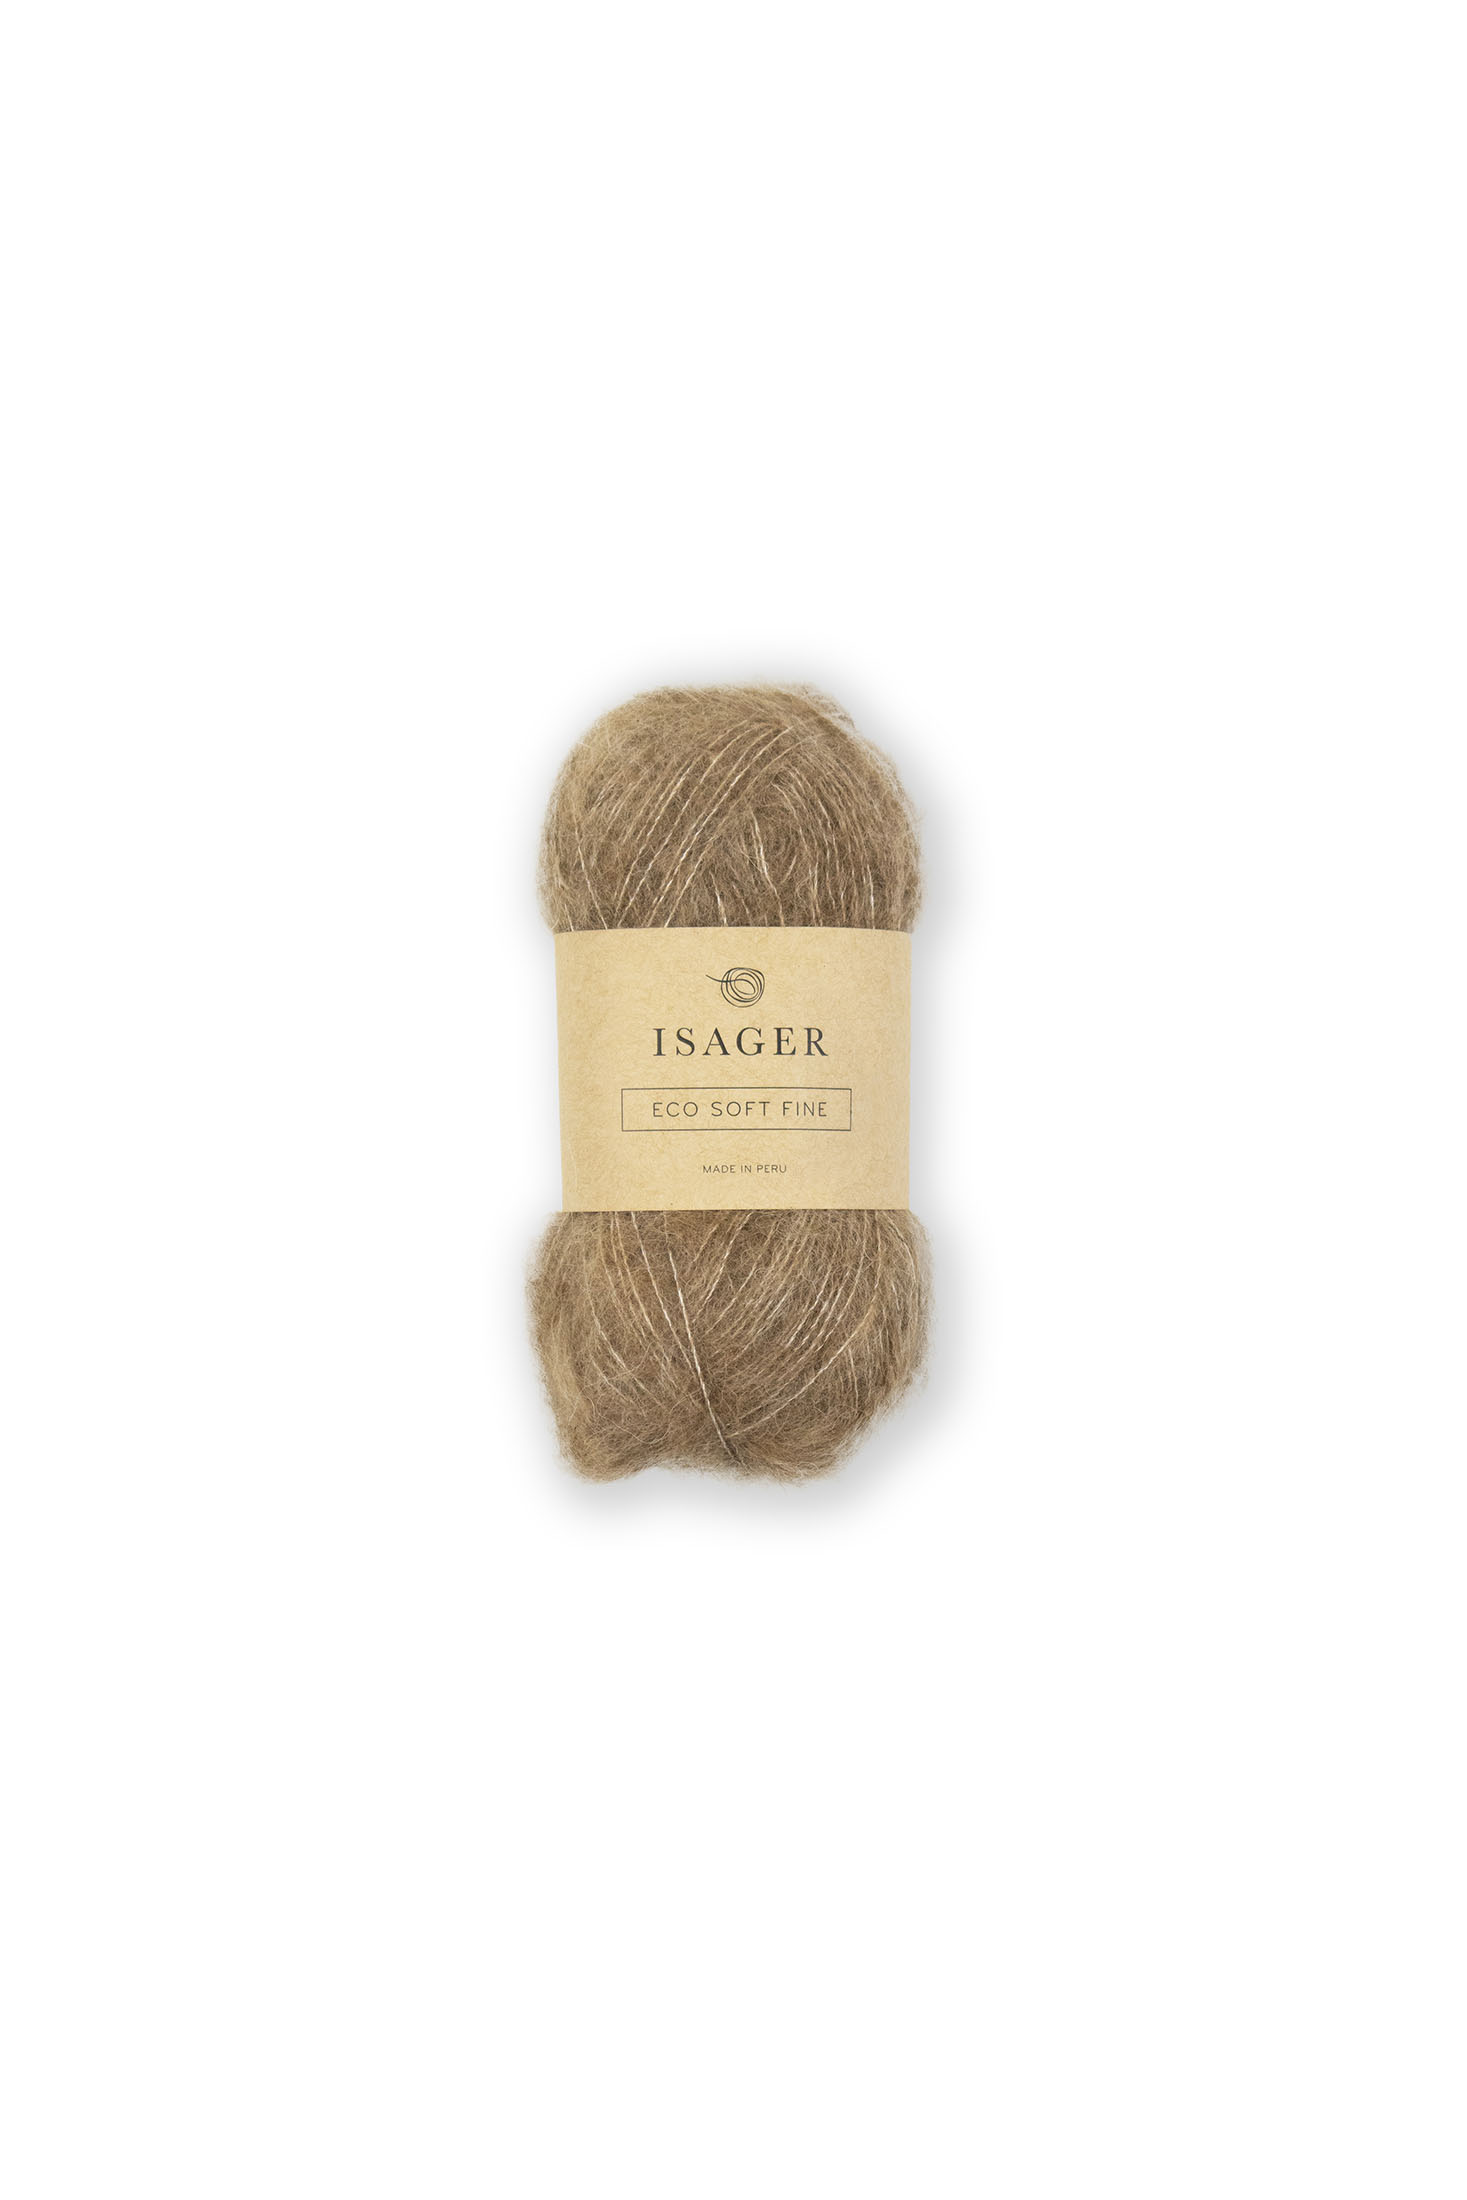 Isager Eco Soft Fine - E7s 